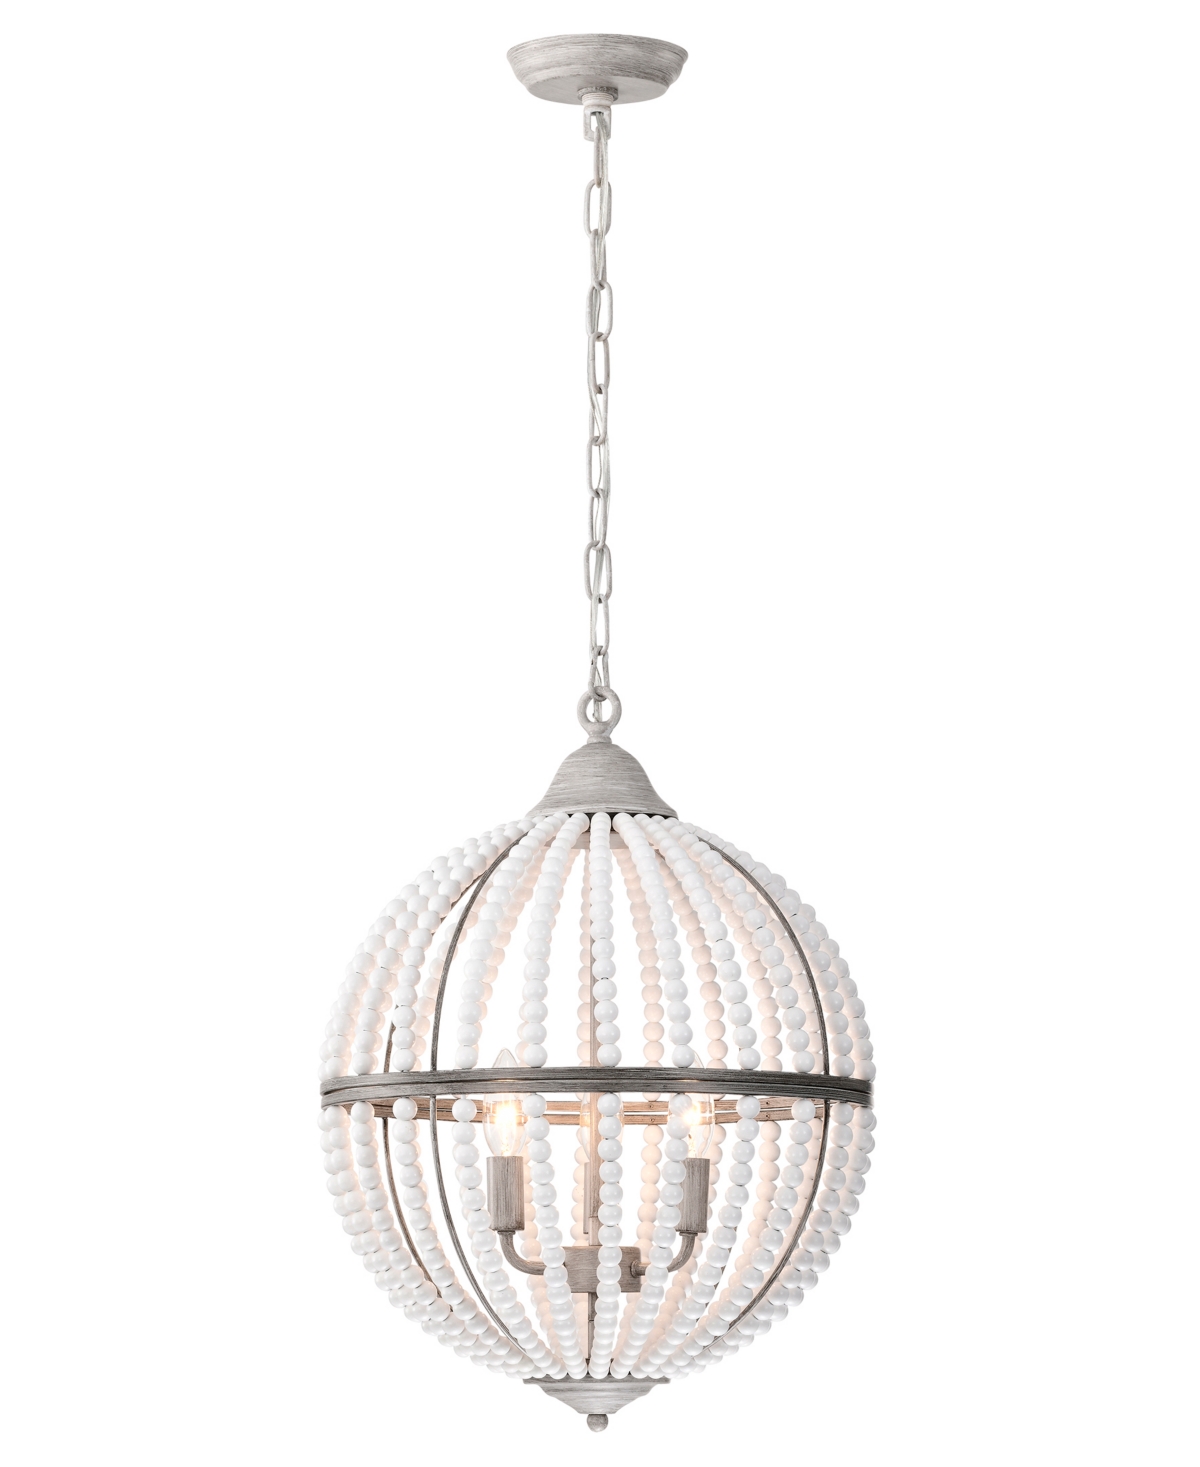 Home Accessories Auster 15" 3-light Indoor Finish Chandelier With Light Kit In Gray Faux Wood Grain And Gloss White